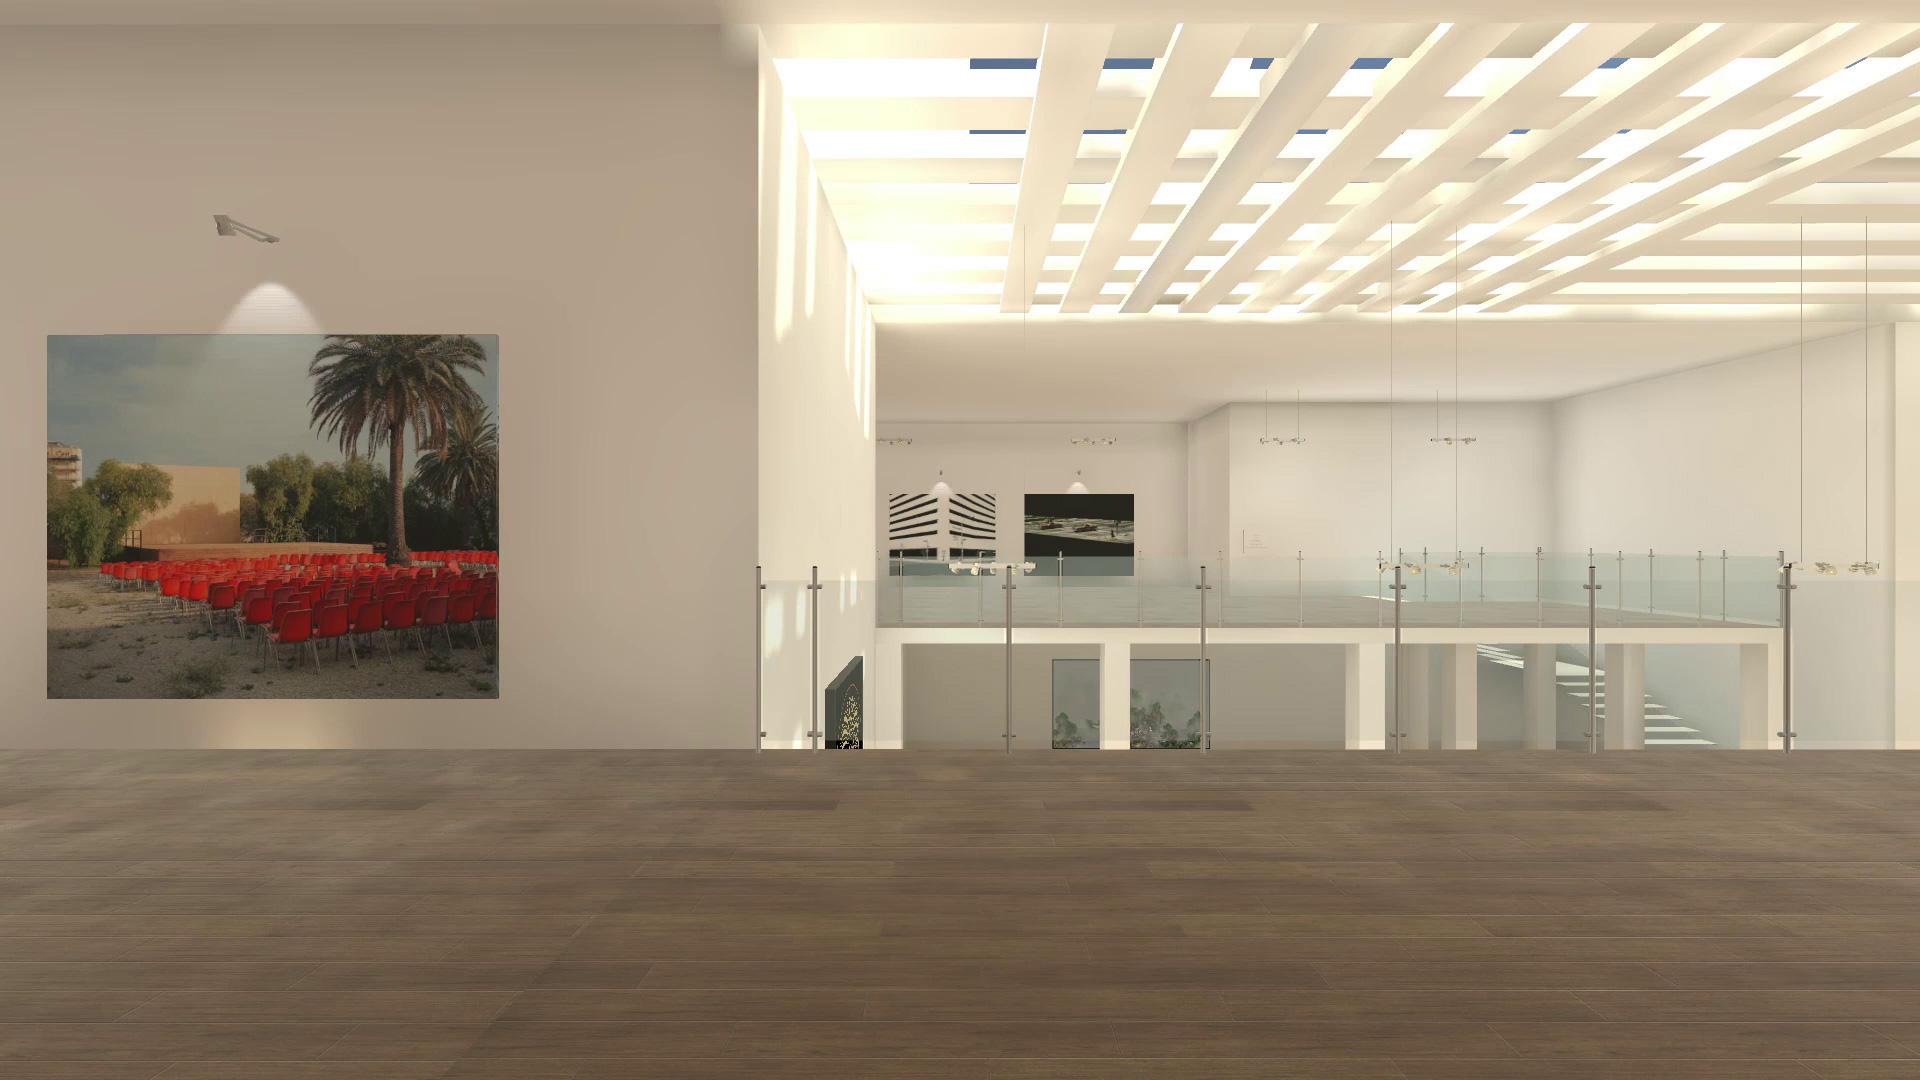 Screenshot from Sedition VR white cube gallery environment